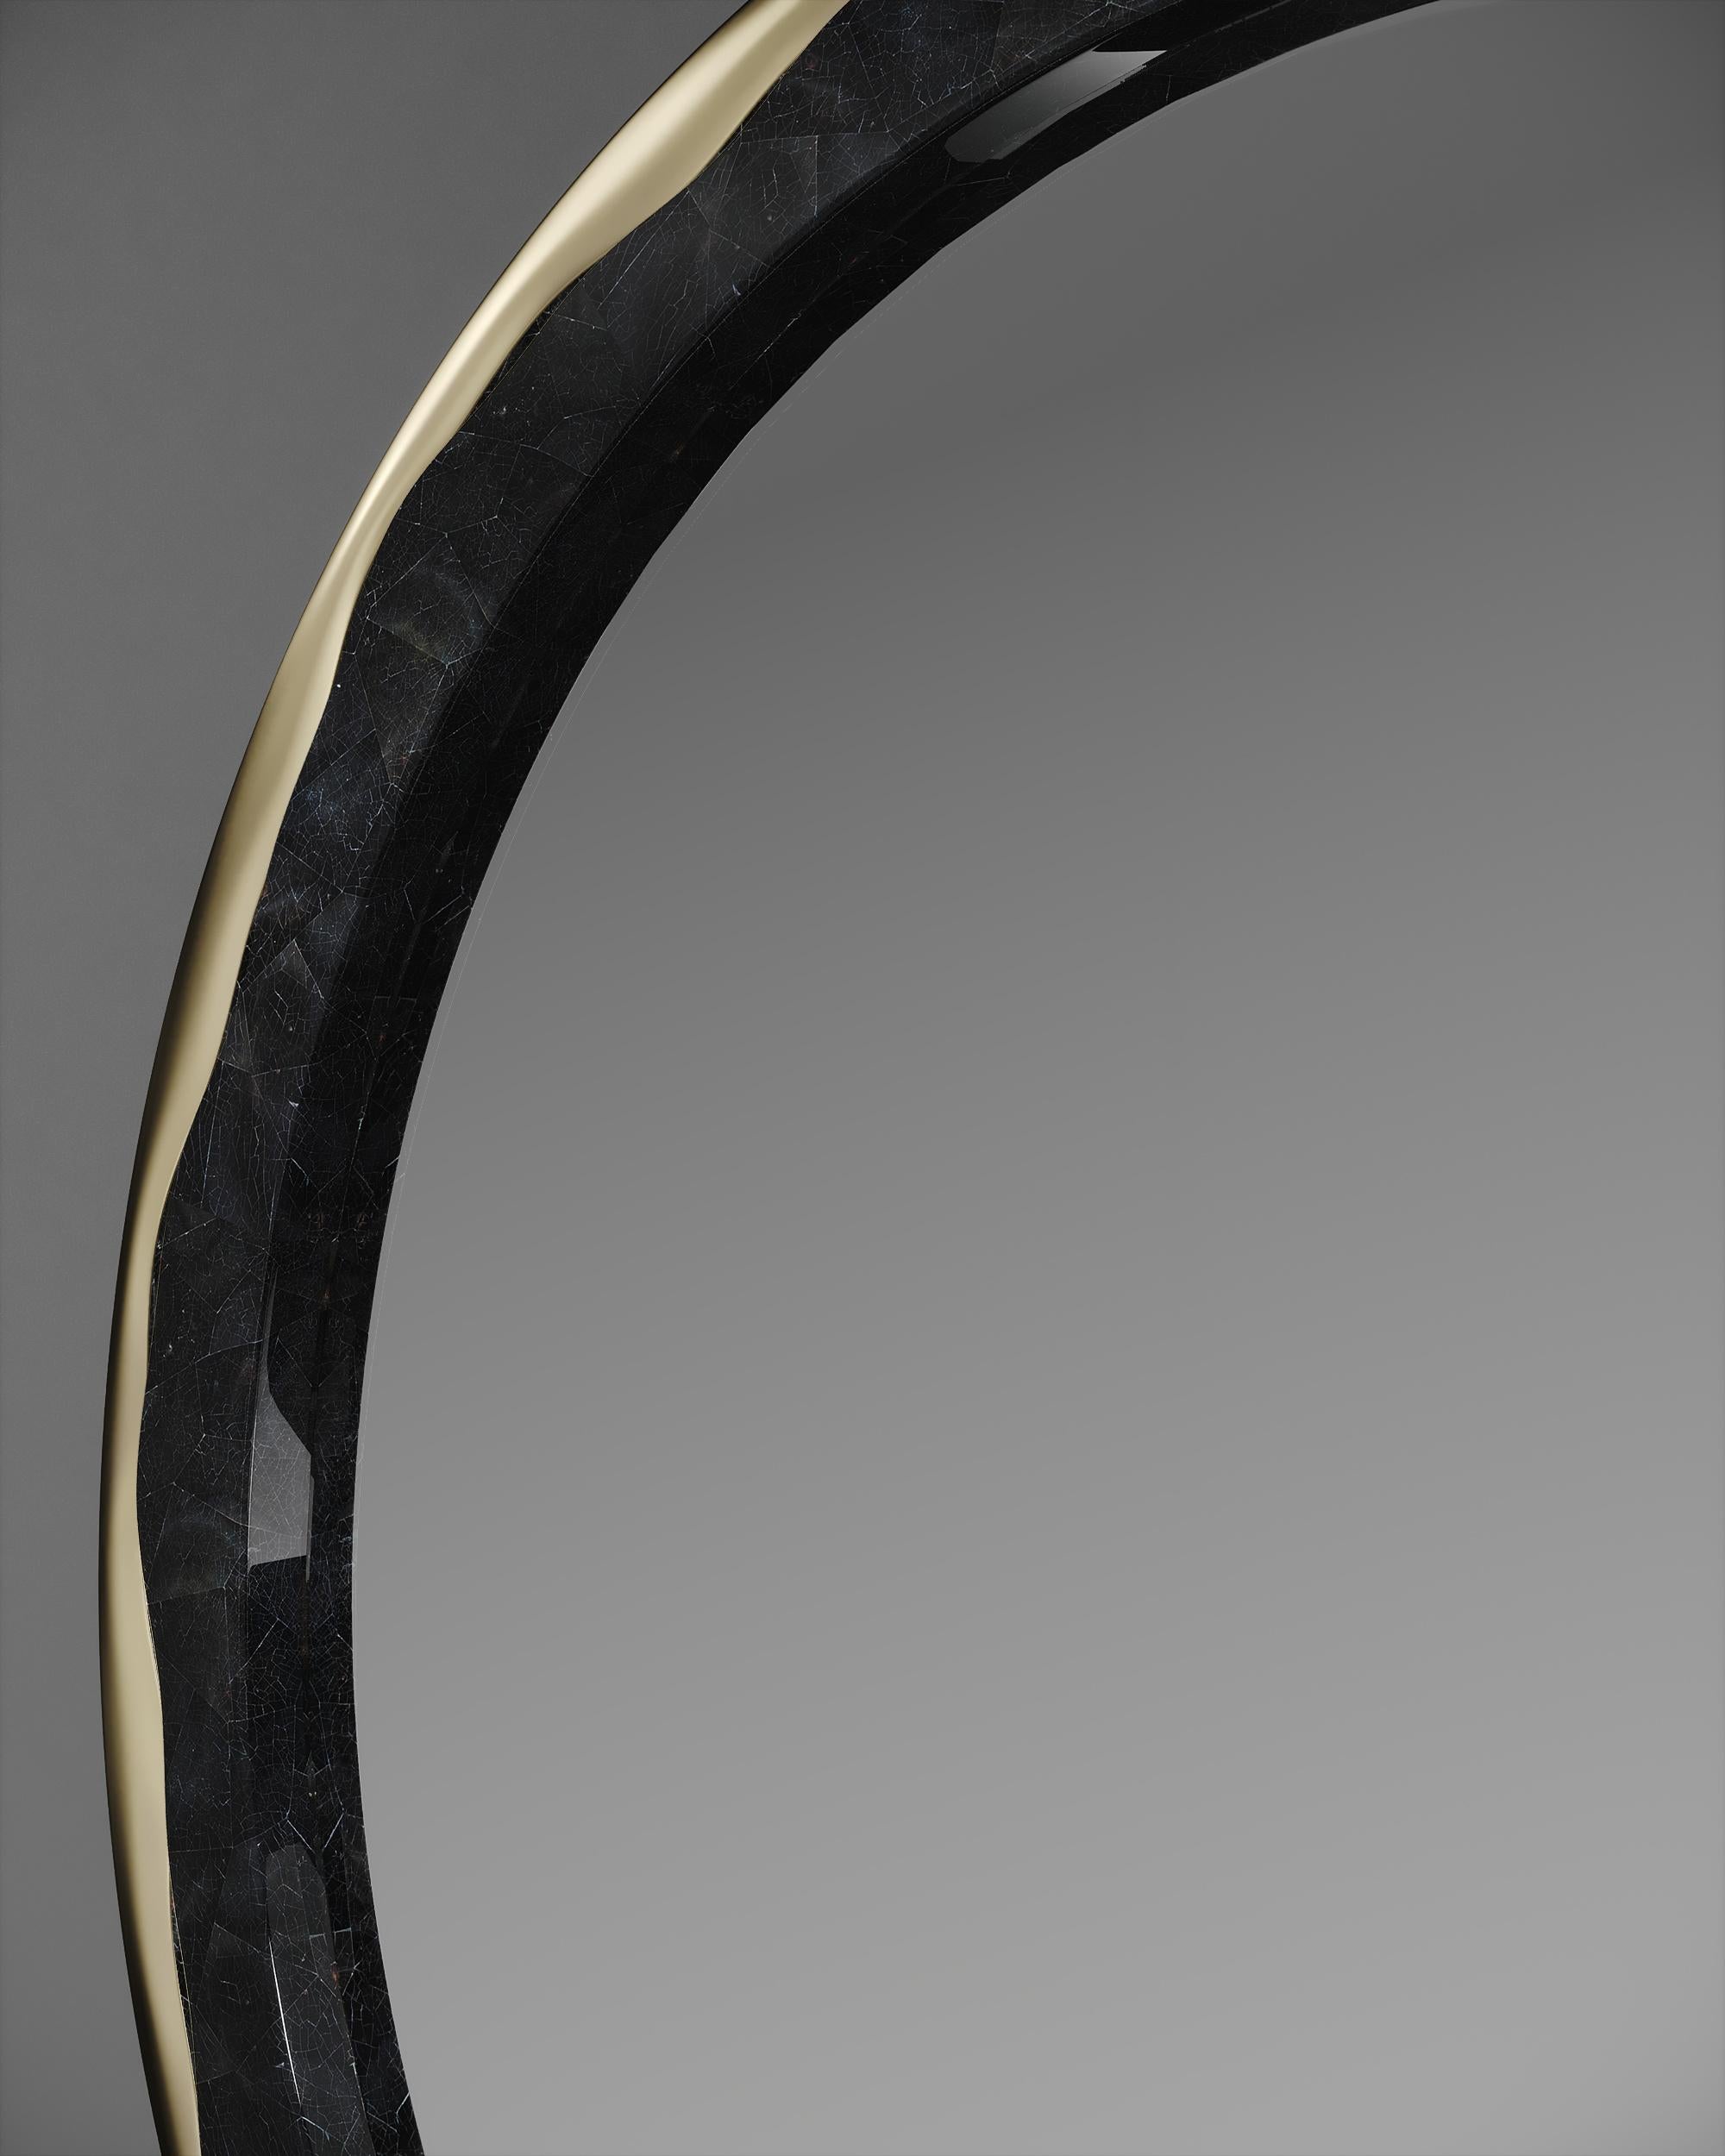 The melting mirror by R&Y Augousti inlaid in black pen shell and bronze-patina brass, is an iconic piece of theirs with their signature 